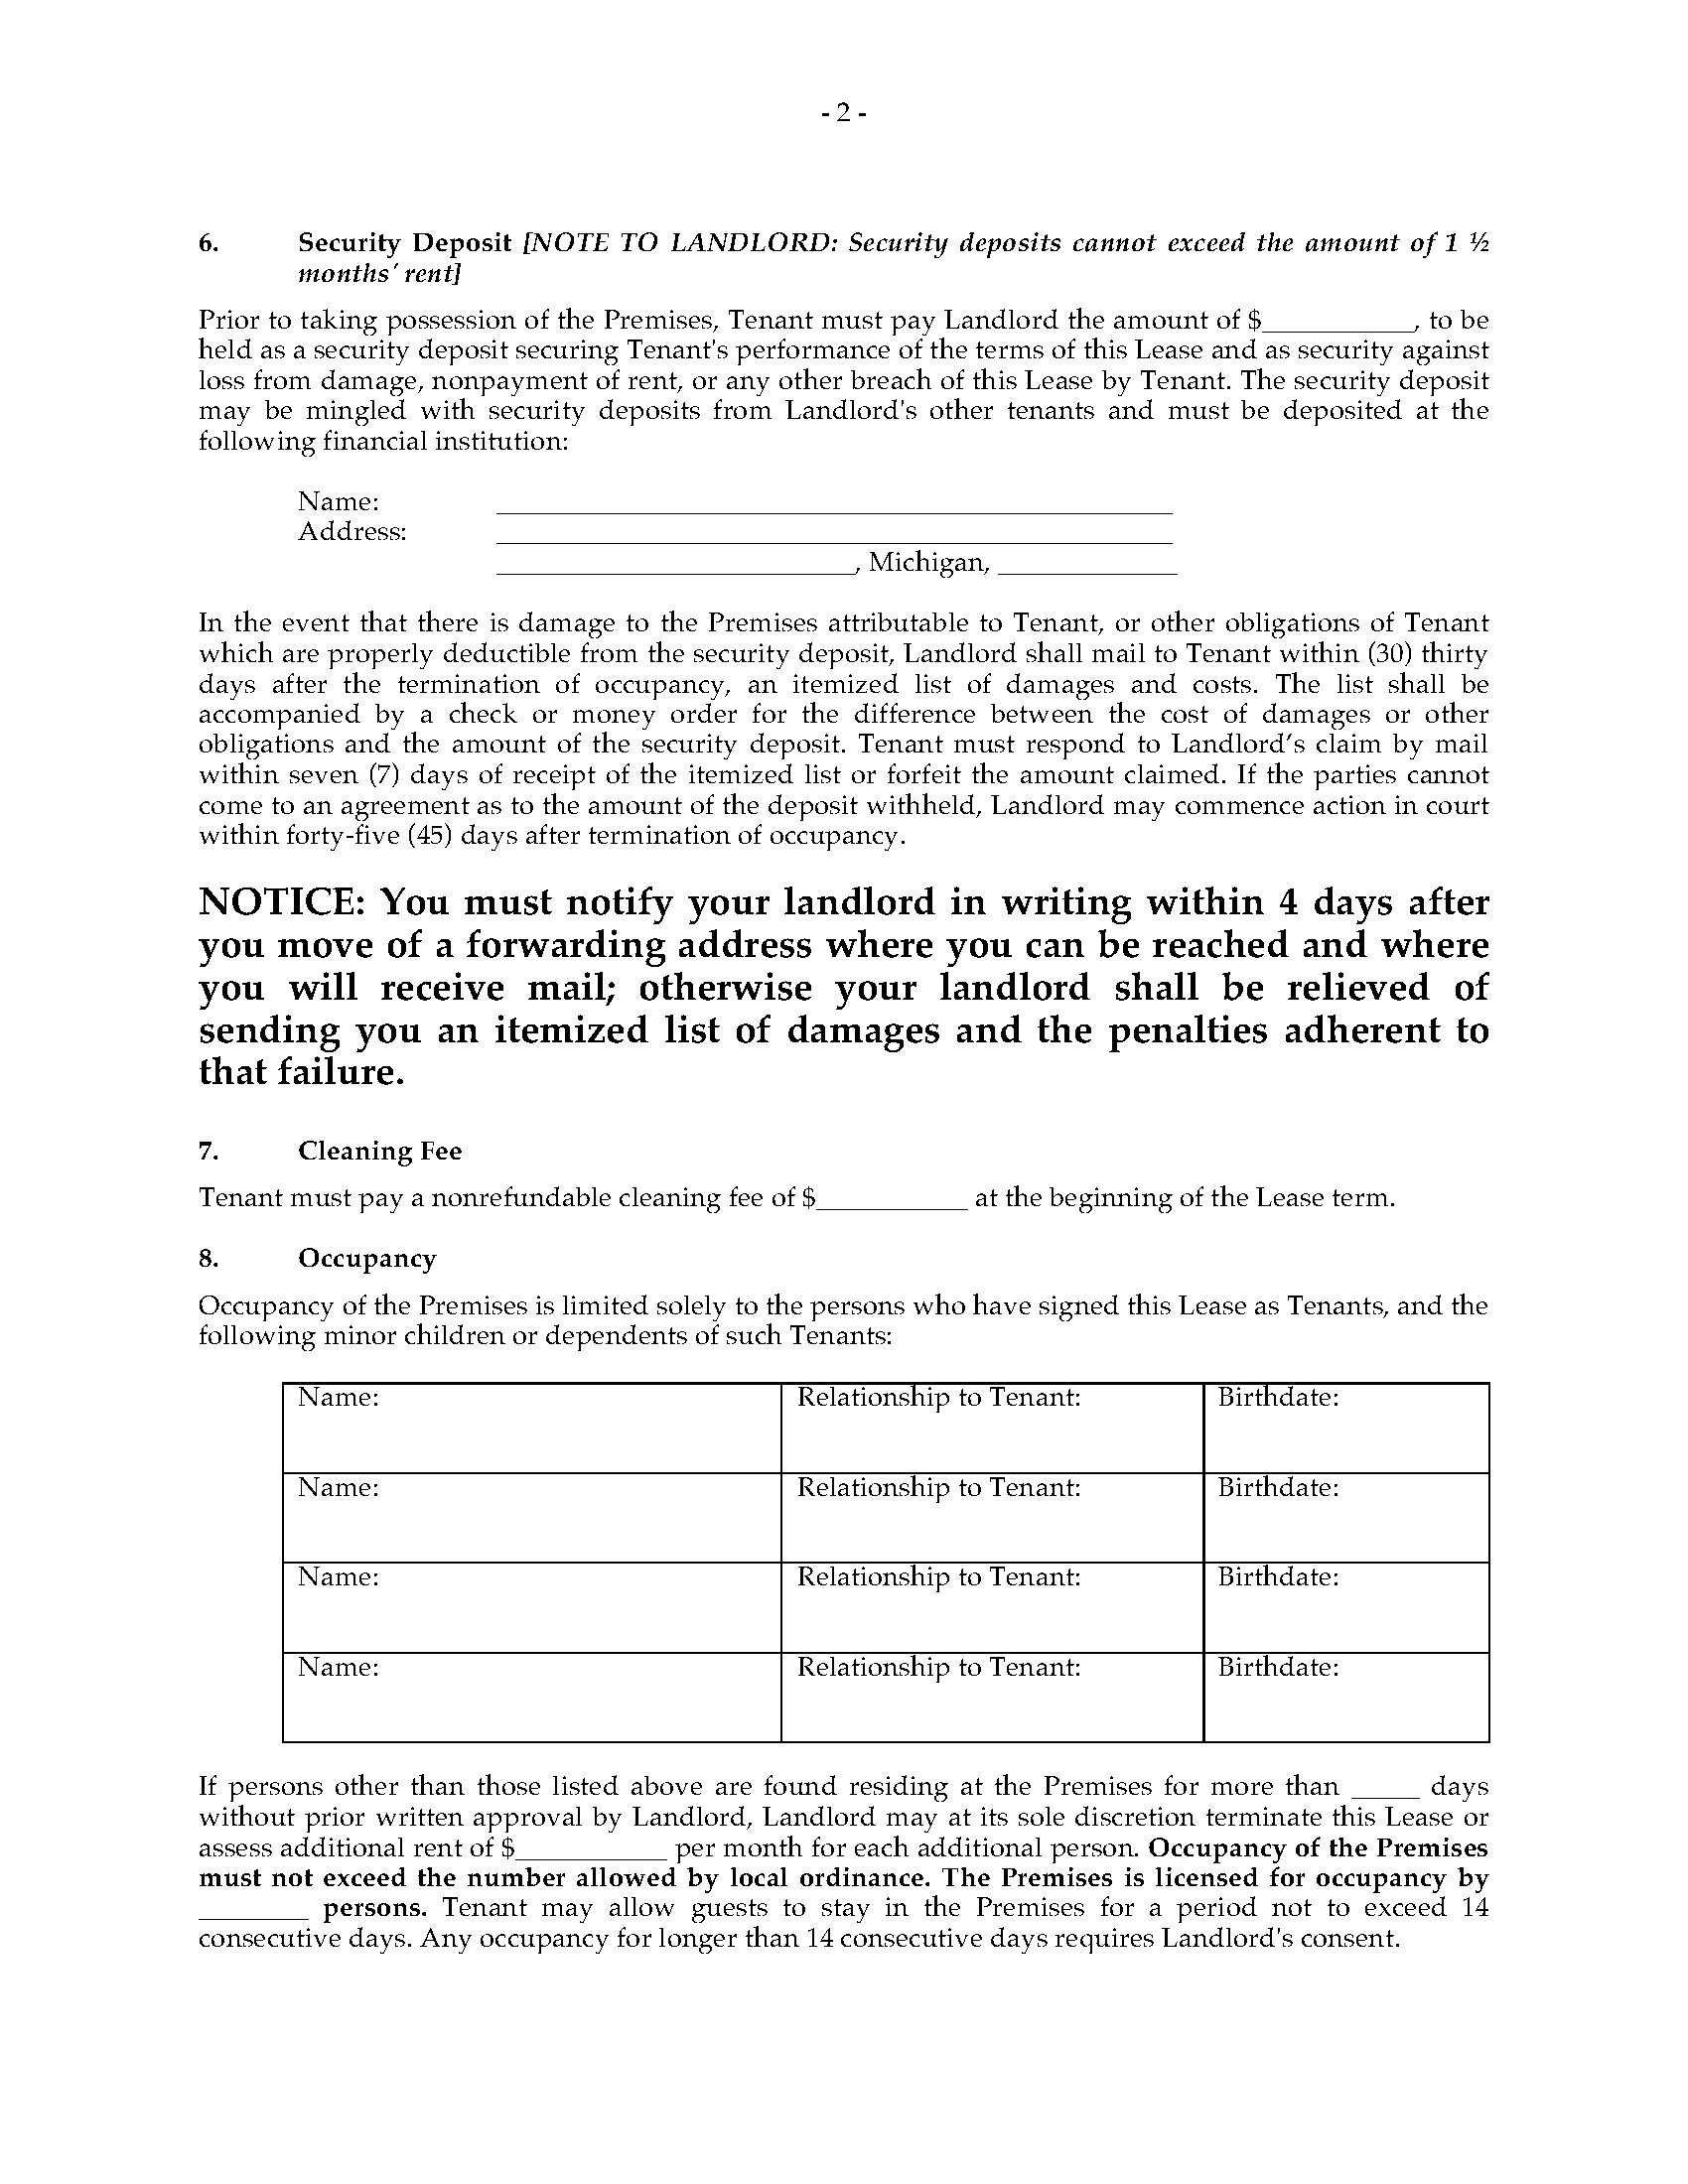 Michigan Apartment Lease Agreement | Legal Forms and Business Templates